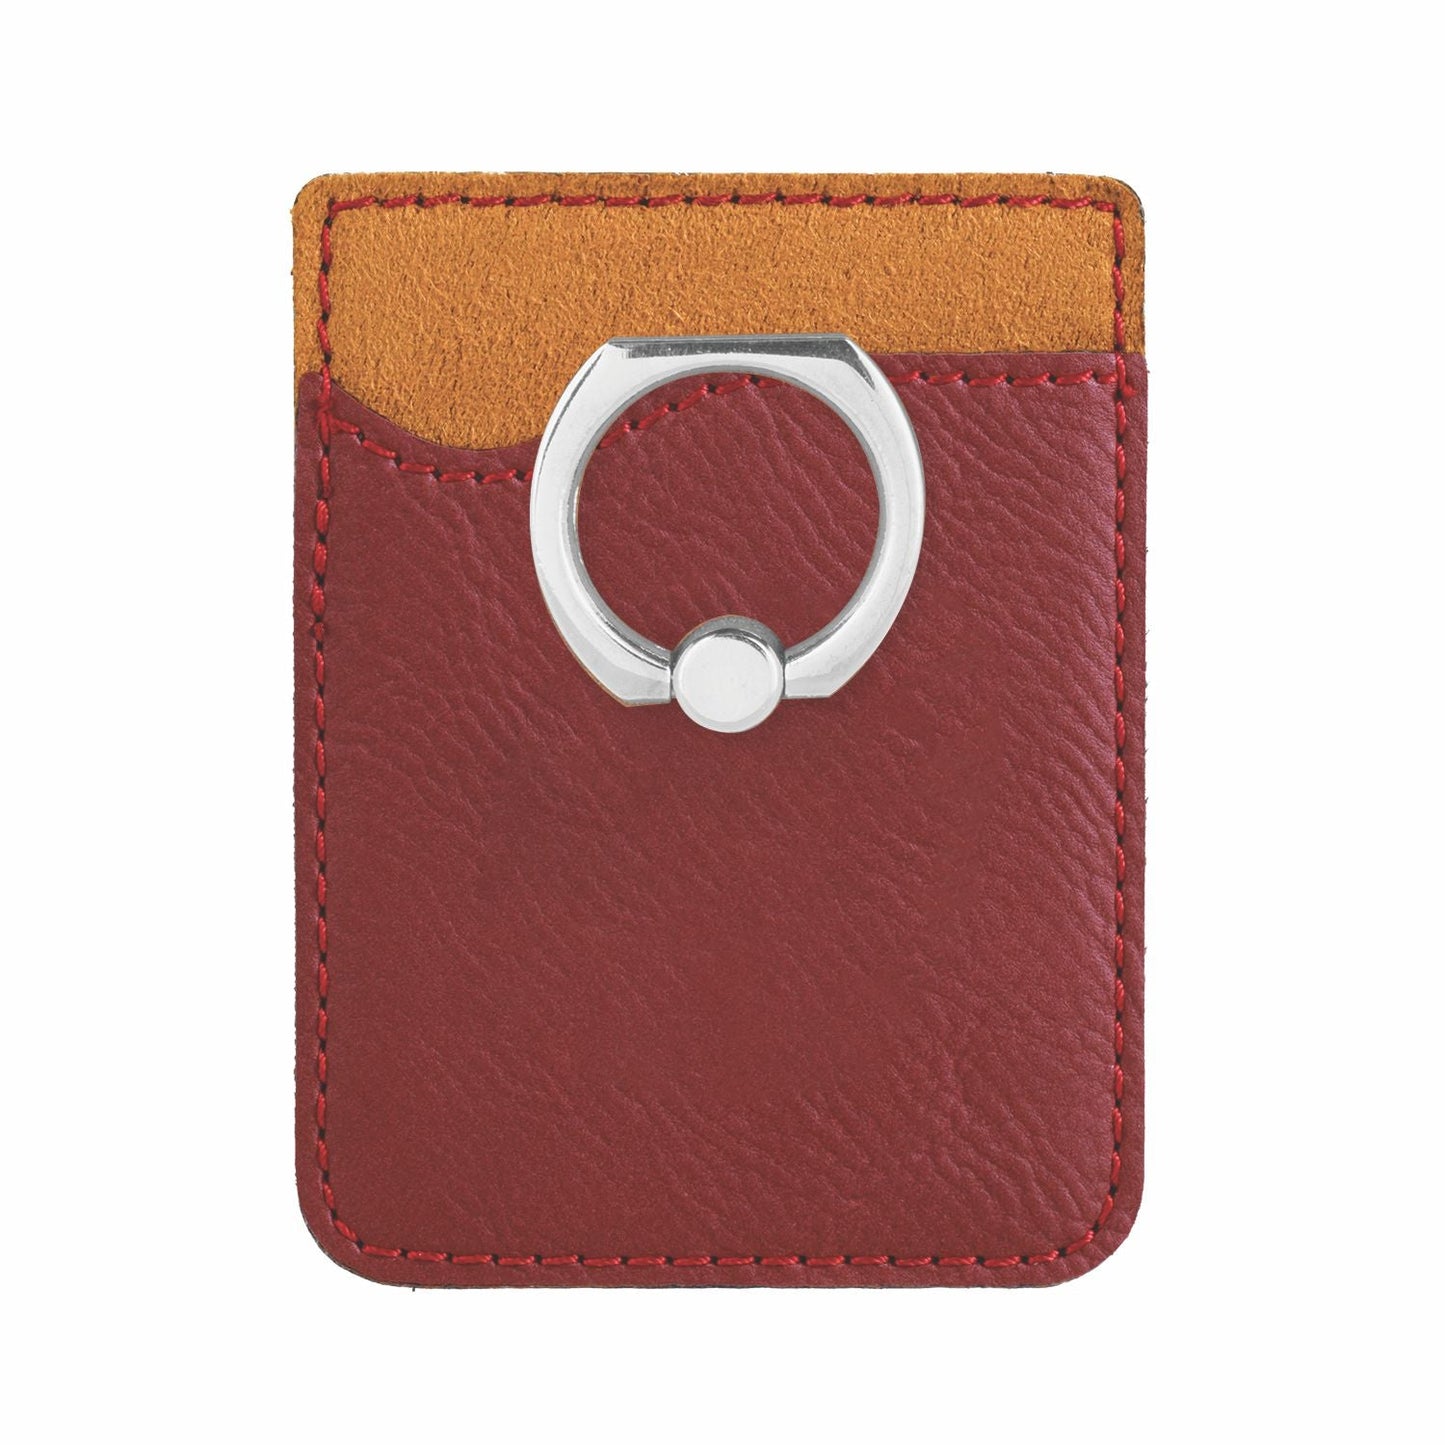 TEE - Leatherette Phone Wallet with Ring - MERCH